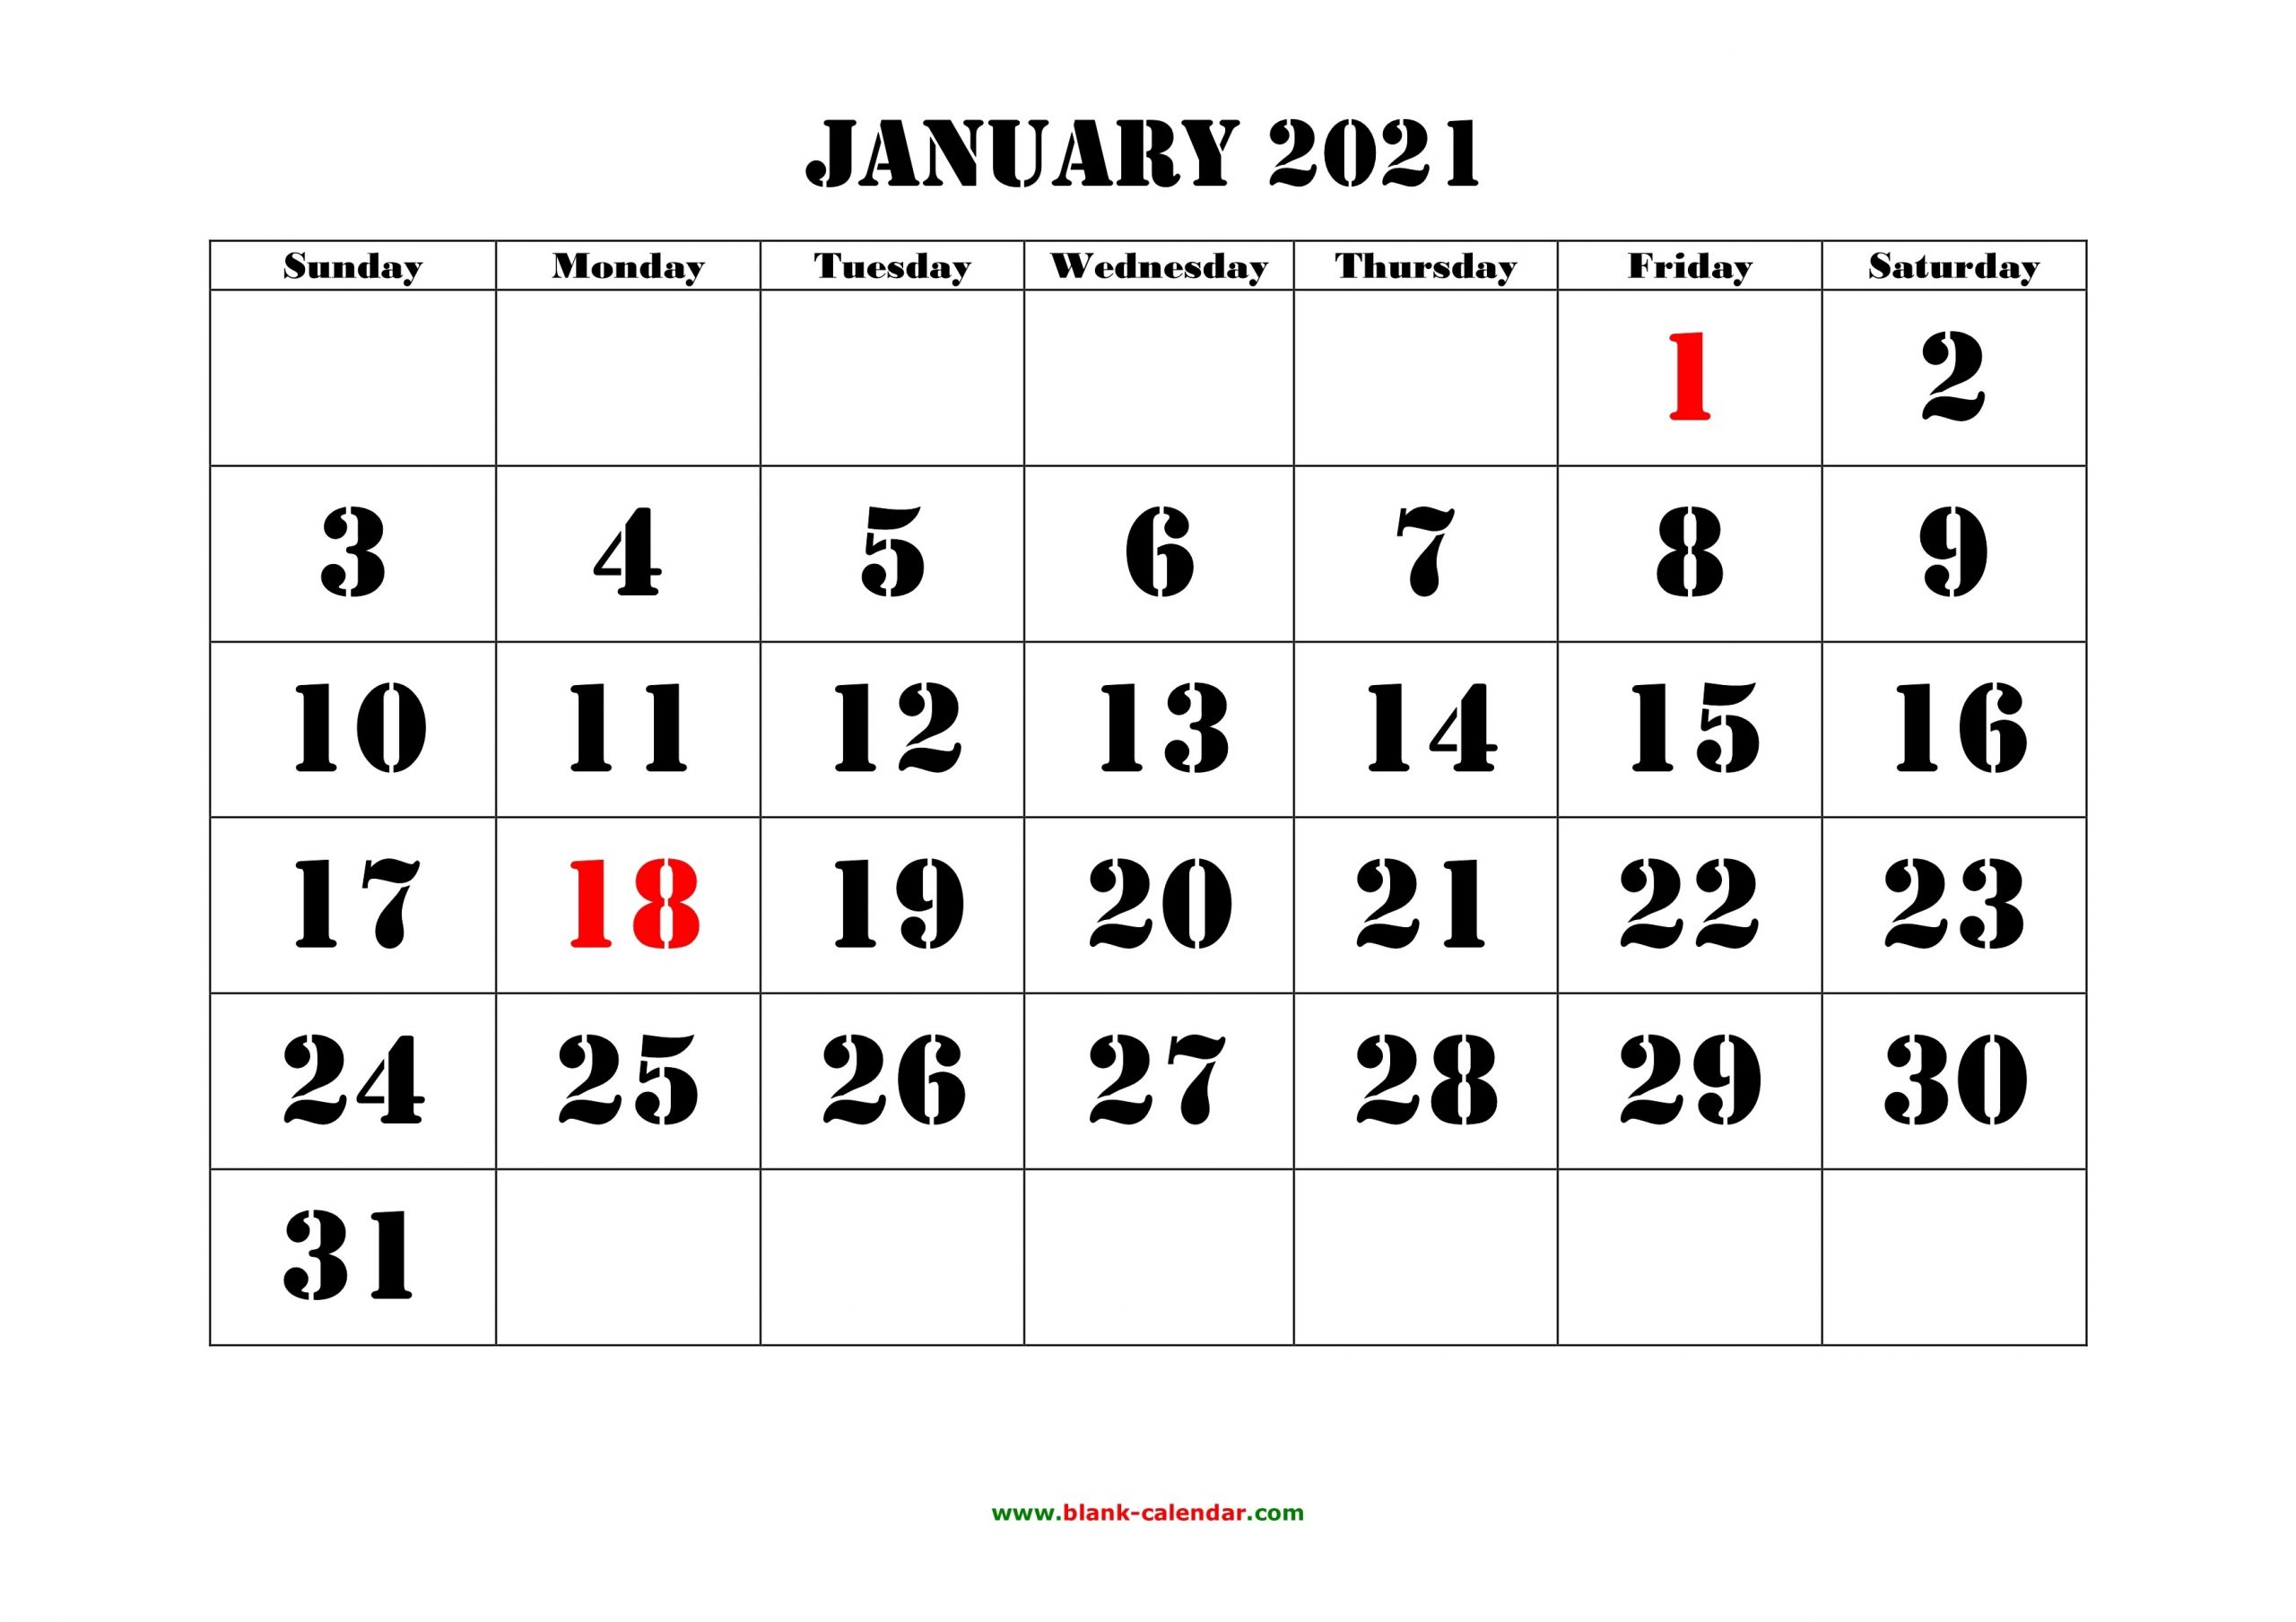 Printable Calendar 2021 | Free Download Yearly Calendar-Free Printable Calendar 2021 2 Month Per Page